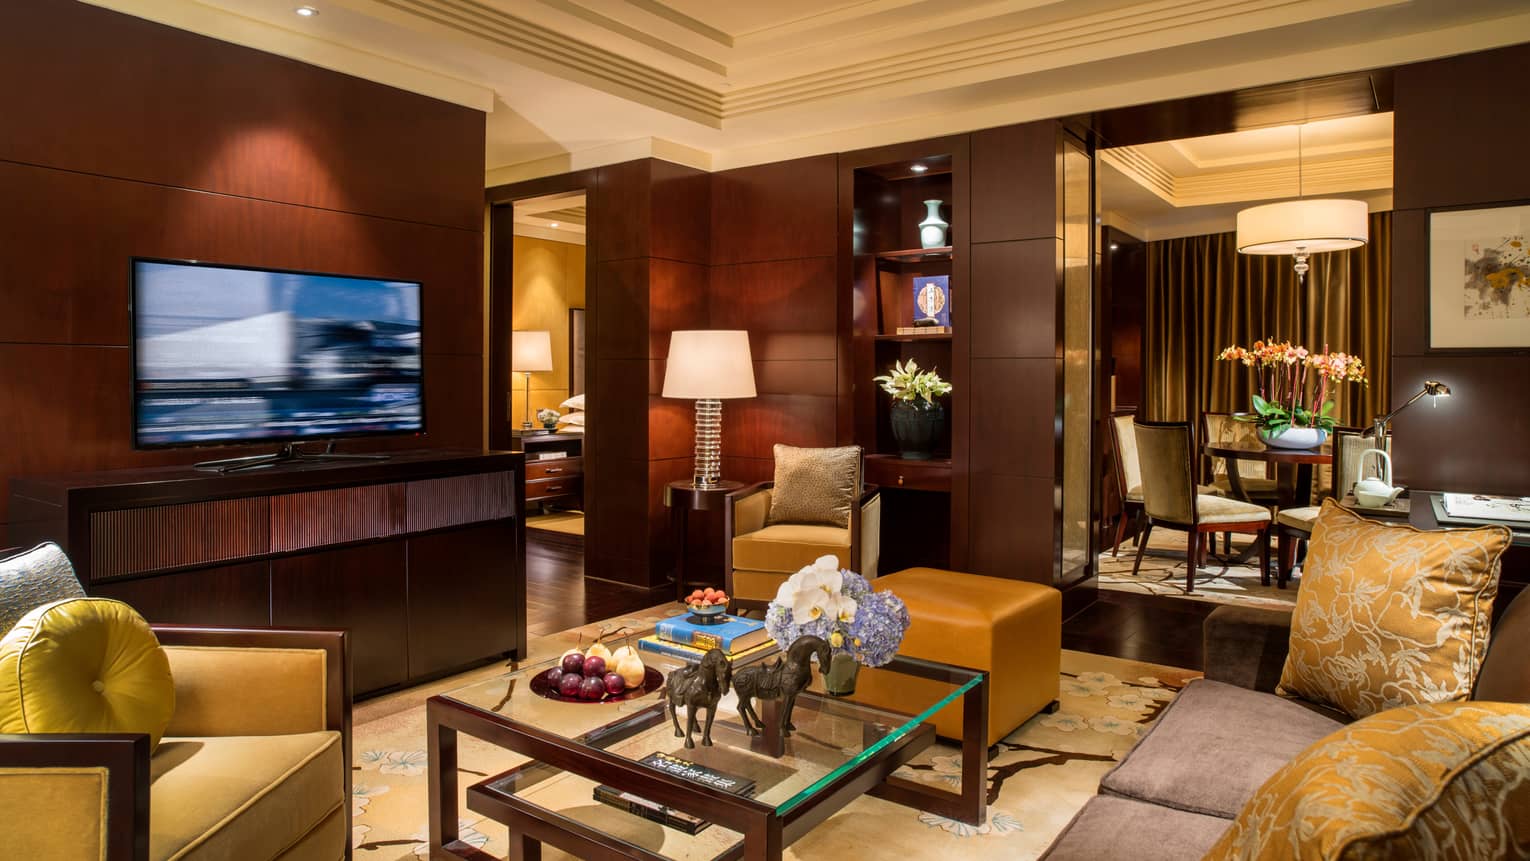 Beijing Suite living room with sofa, gold pillows and armchair, large TV, wood panel walls